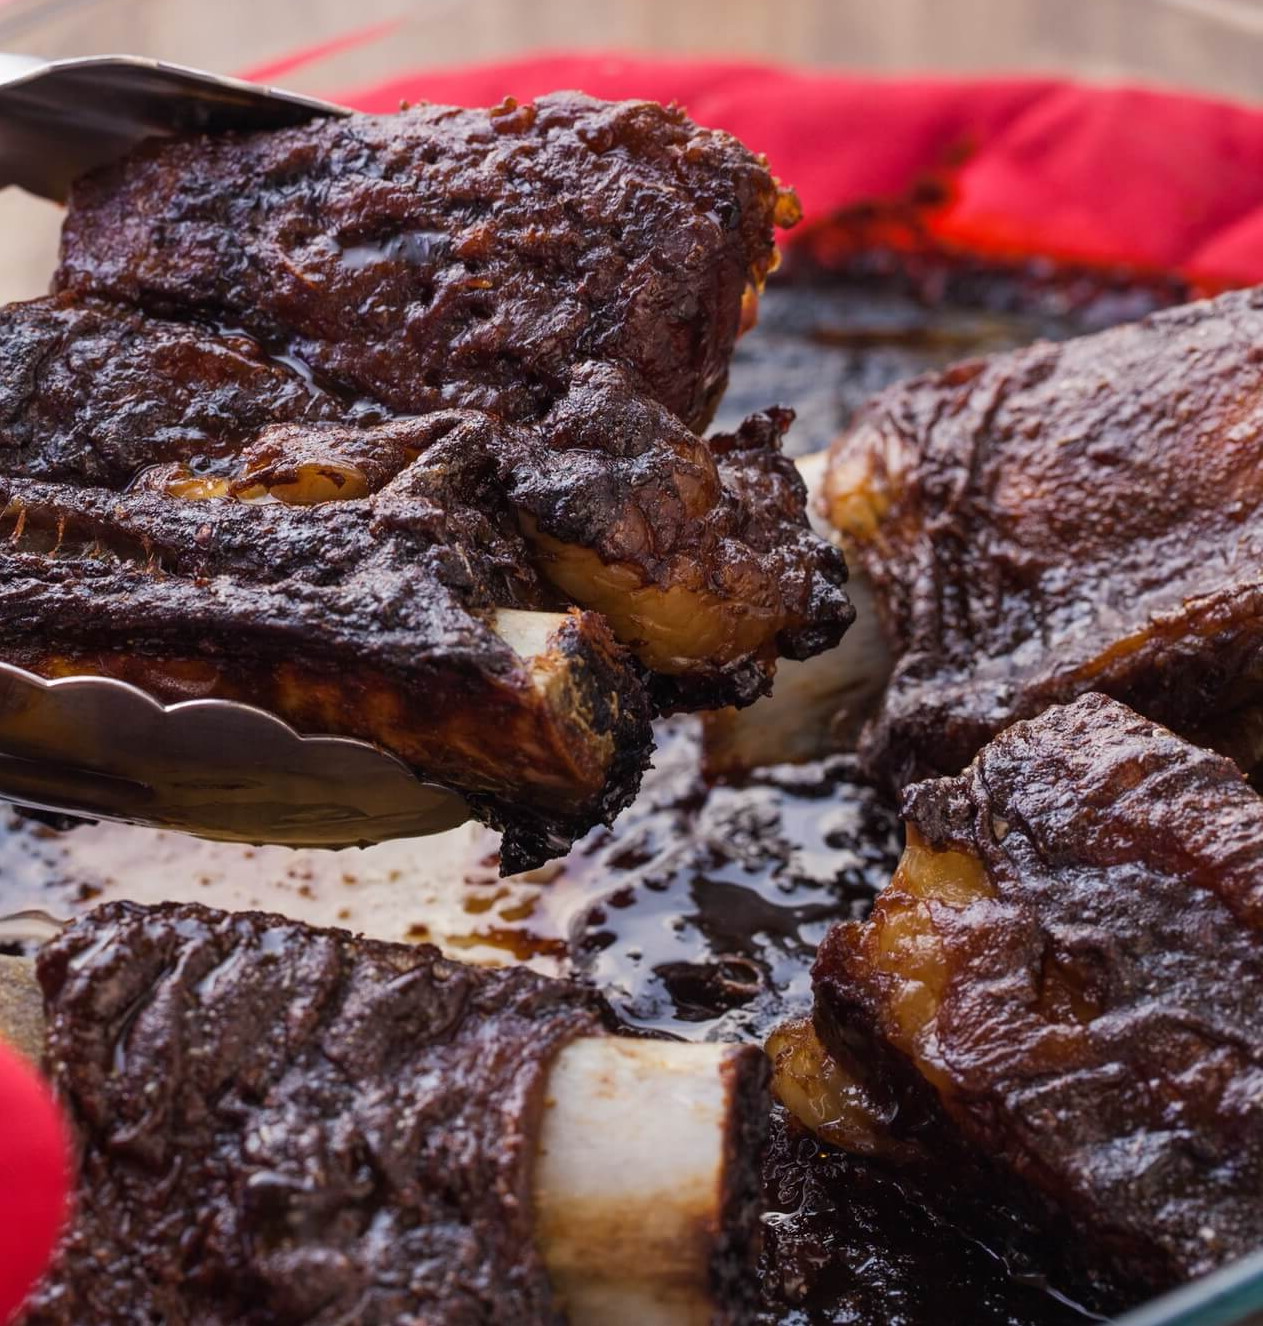 beef short ribs are great for bbq catering. Although they are expensive.